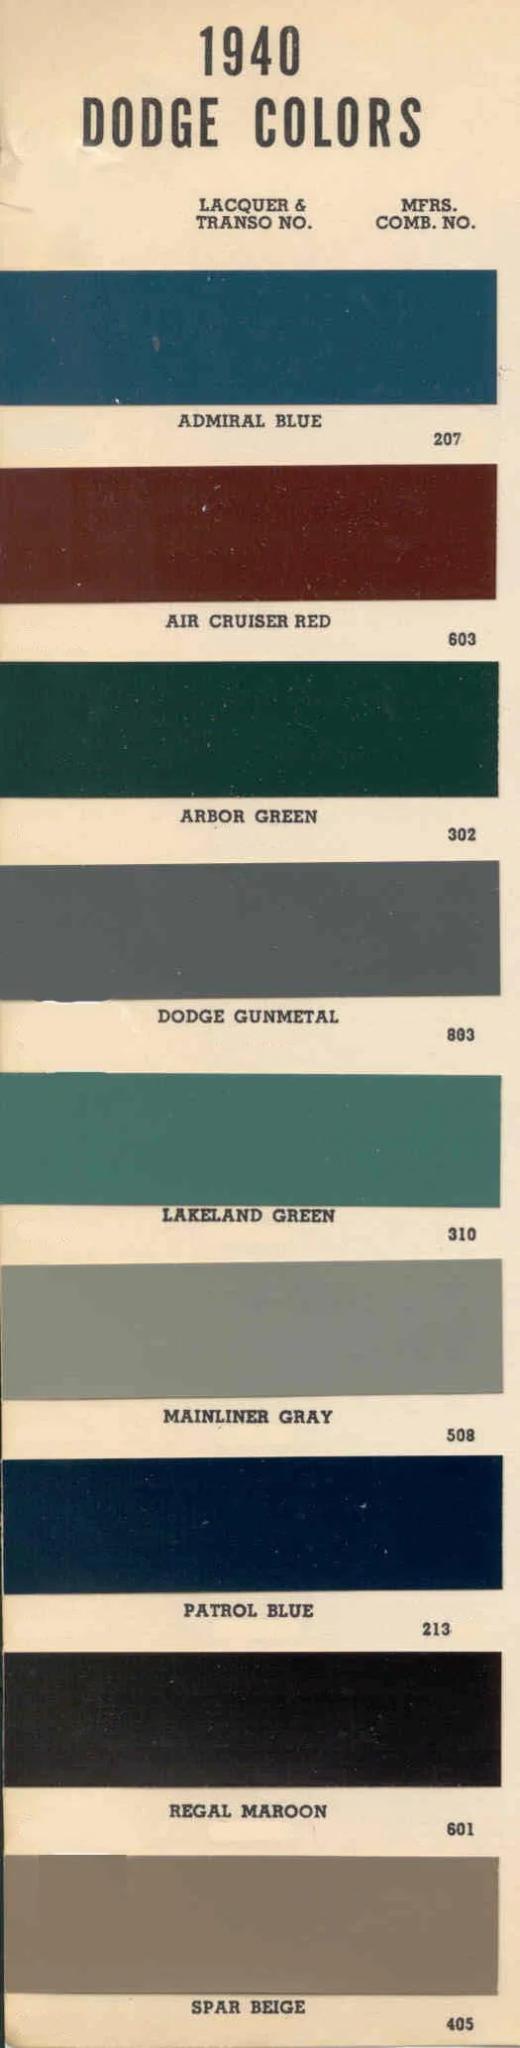 Summary Of Colors used on all Dodge Vehicles in 1940